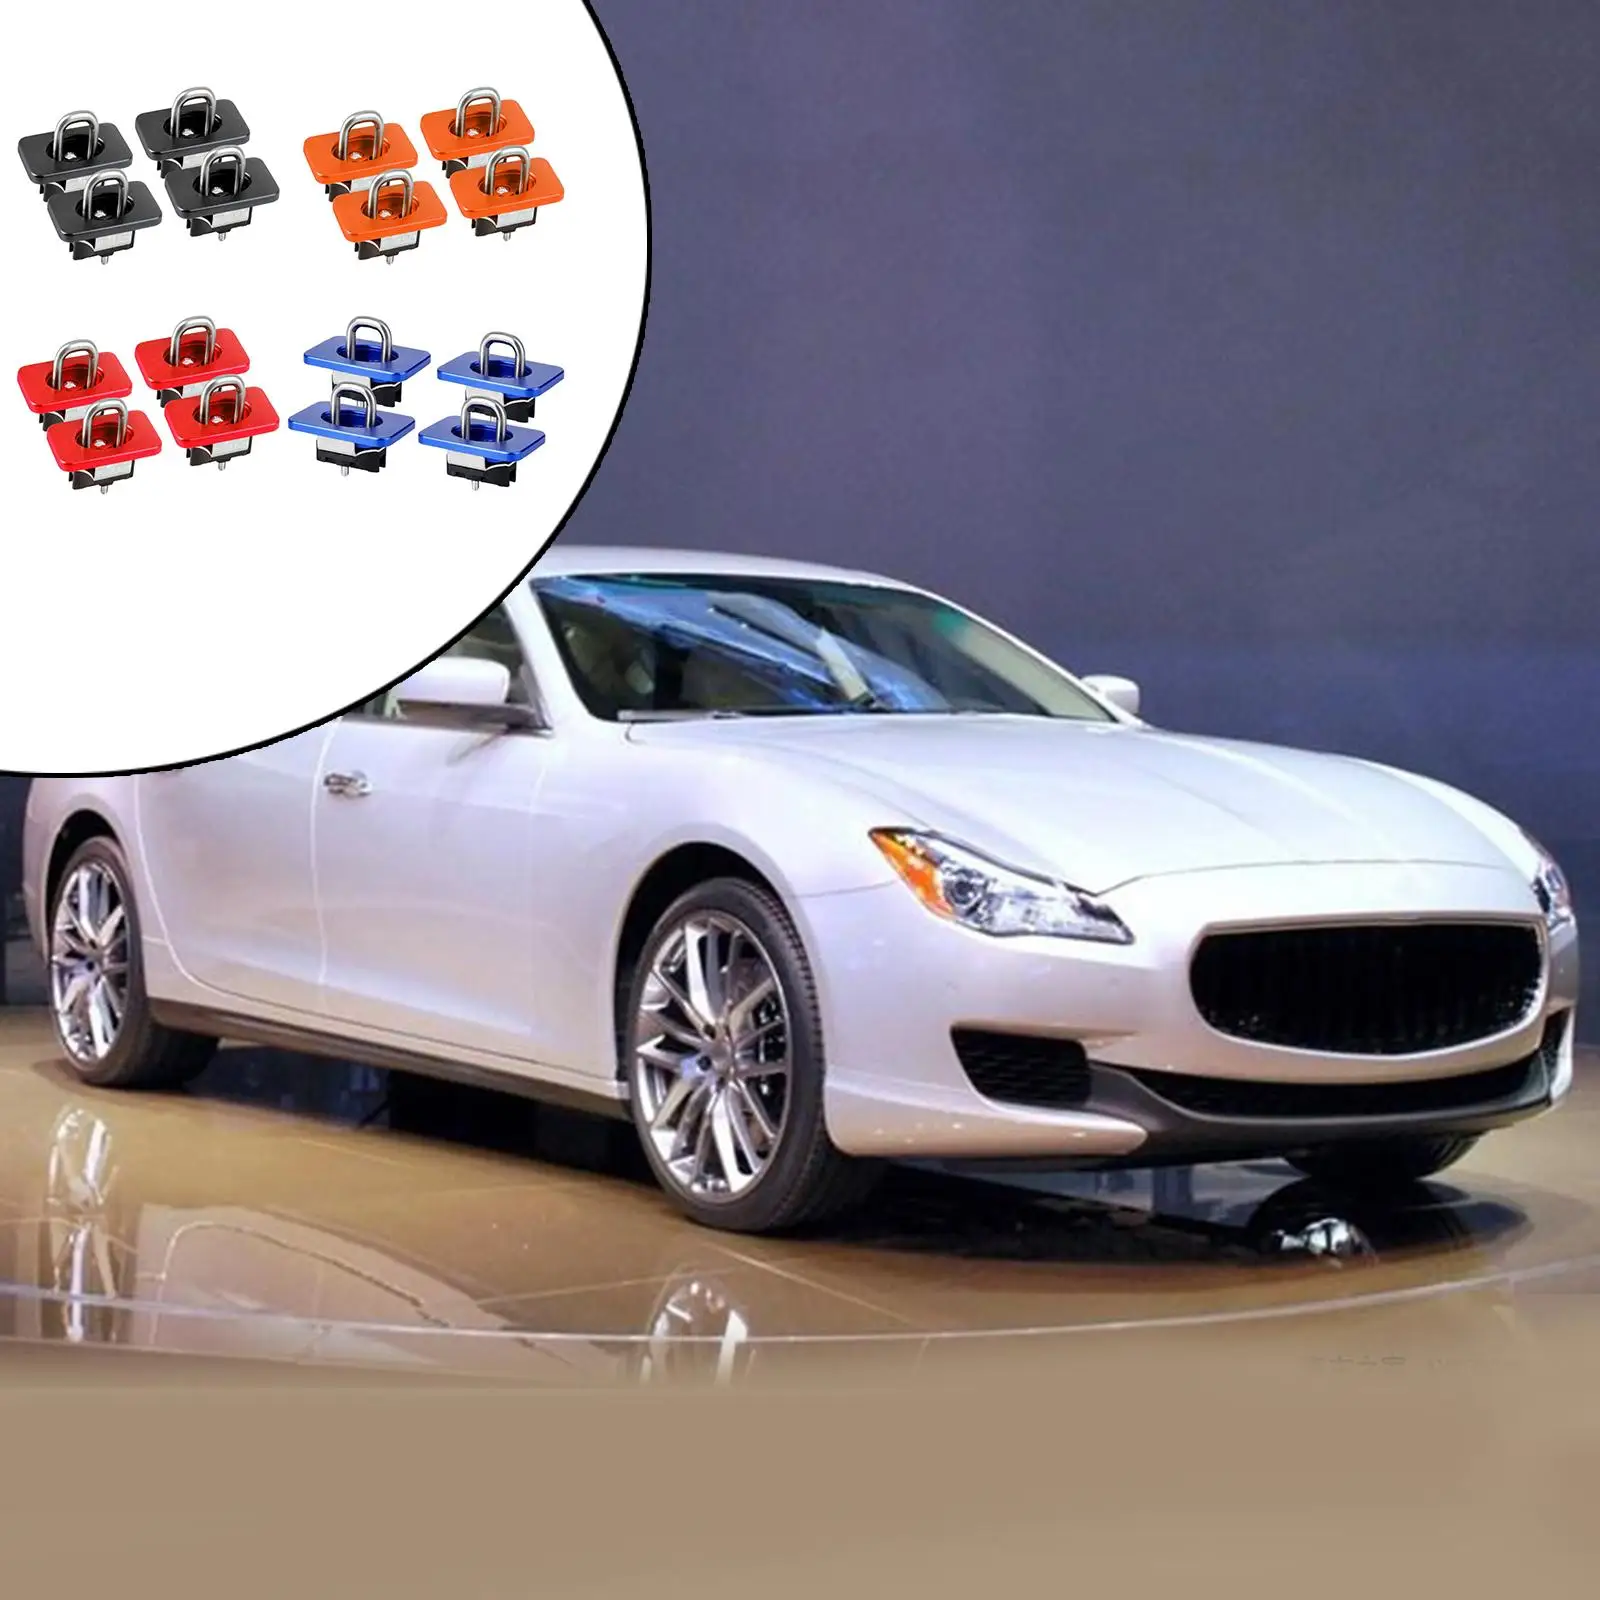  Anchors Professional  Inner Bed Retractable/ Truck Bed Side Wall Anchors /Fit for 1999-2013 Car Accessories